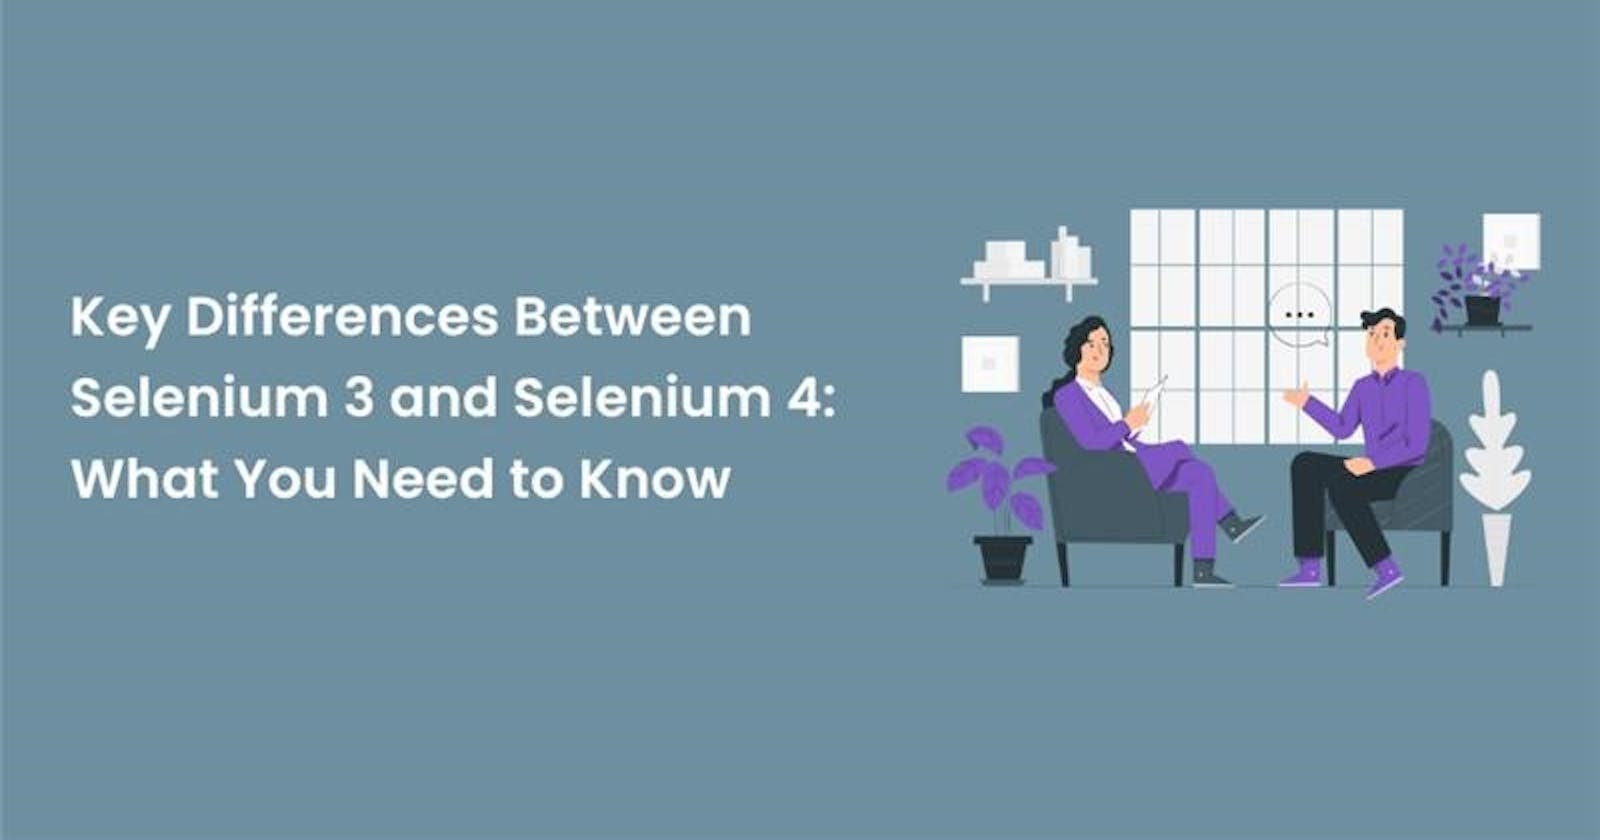 What are the Differences Between Selenium 3 and Selenium 4?